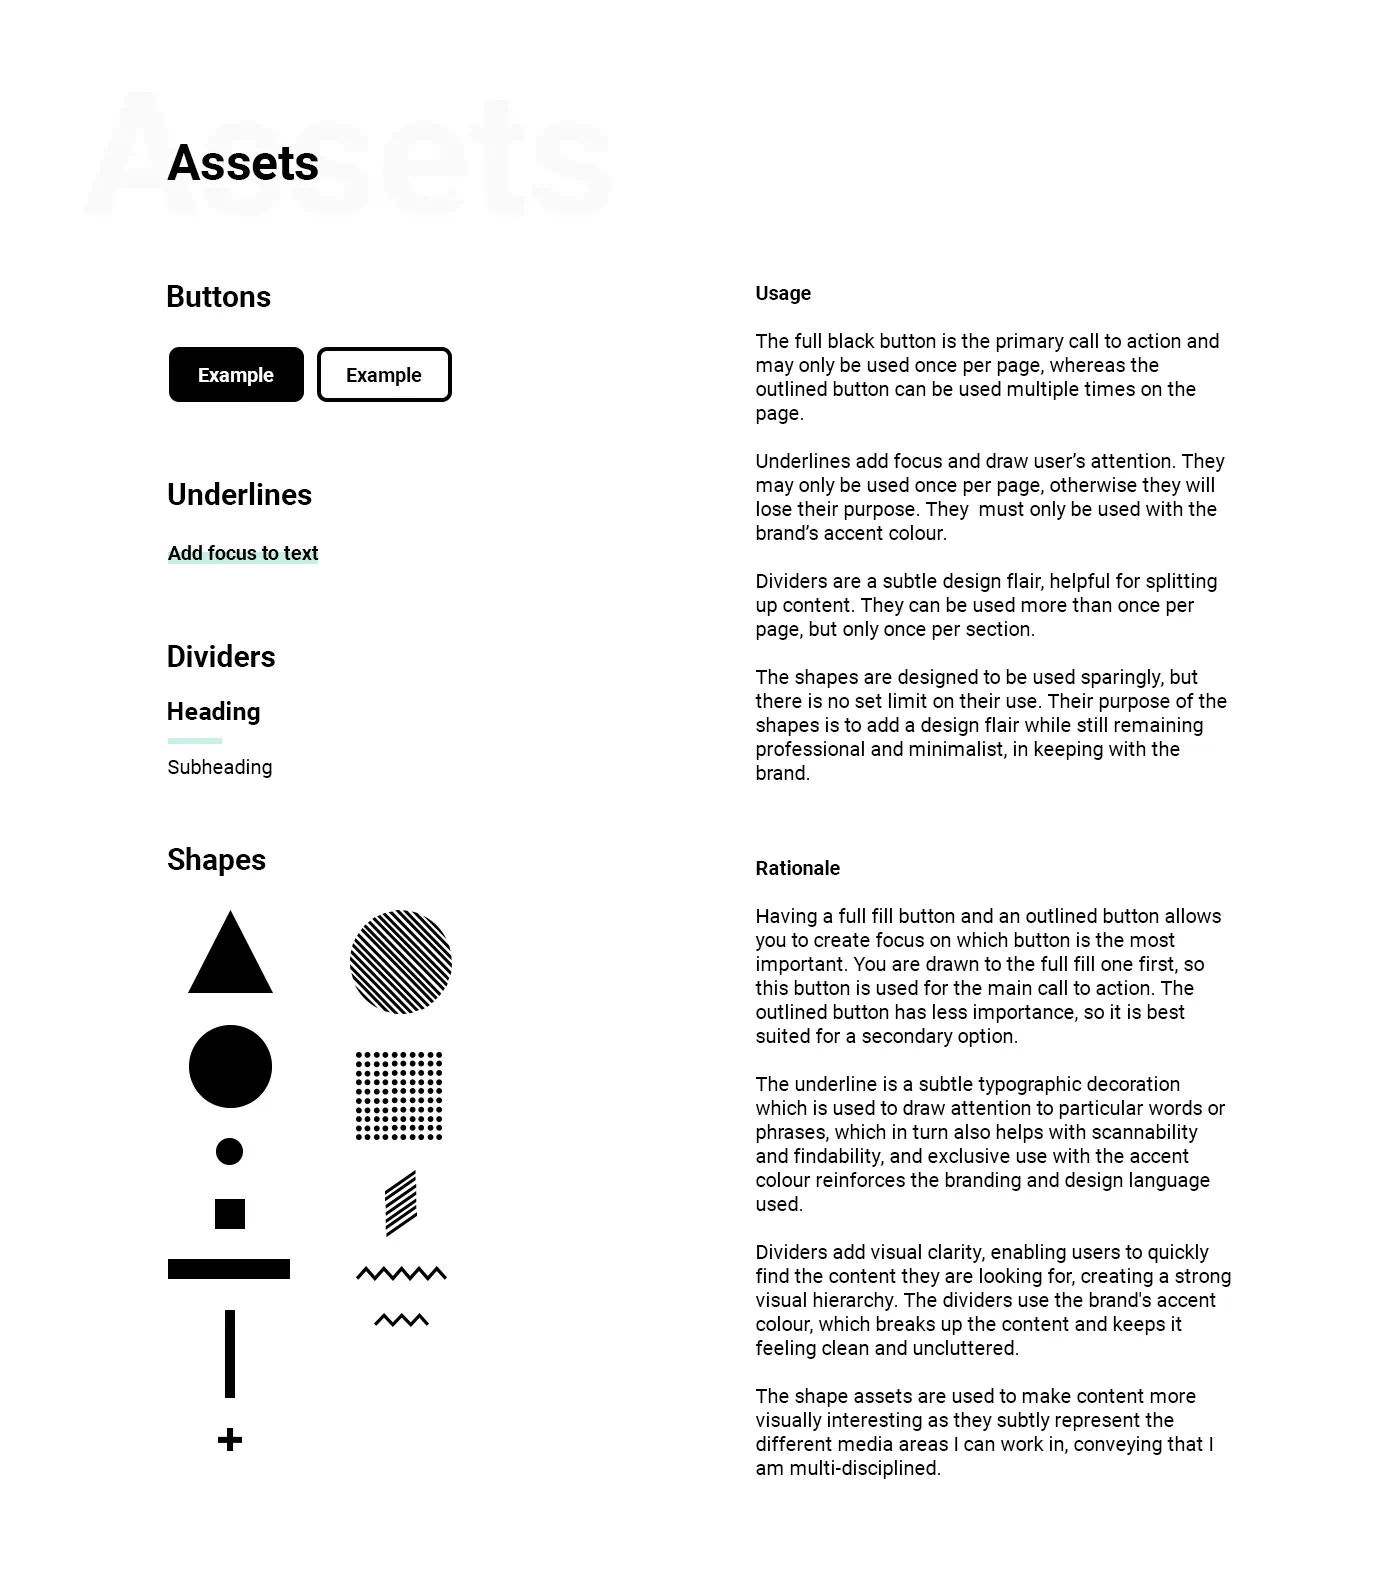 The assets page details the variety of design elements to be used by the brand